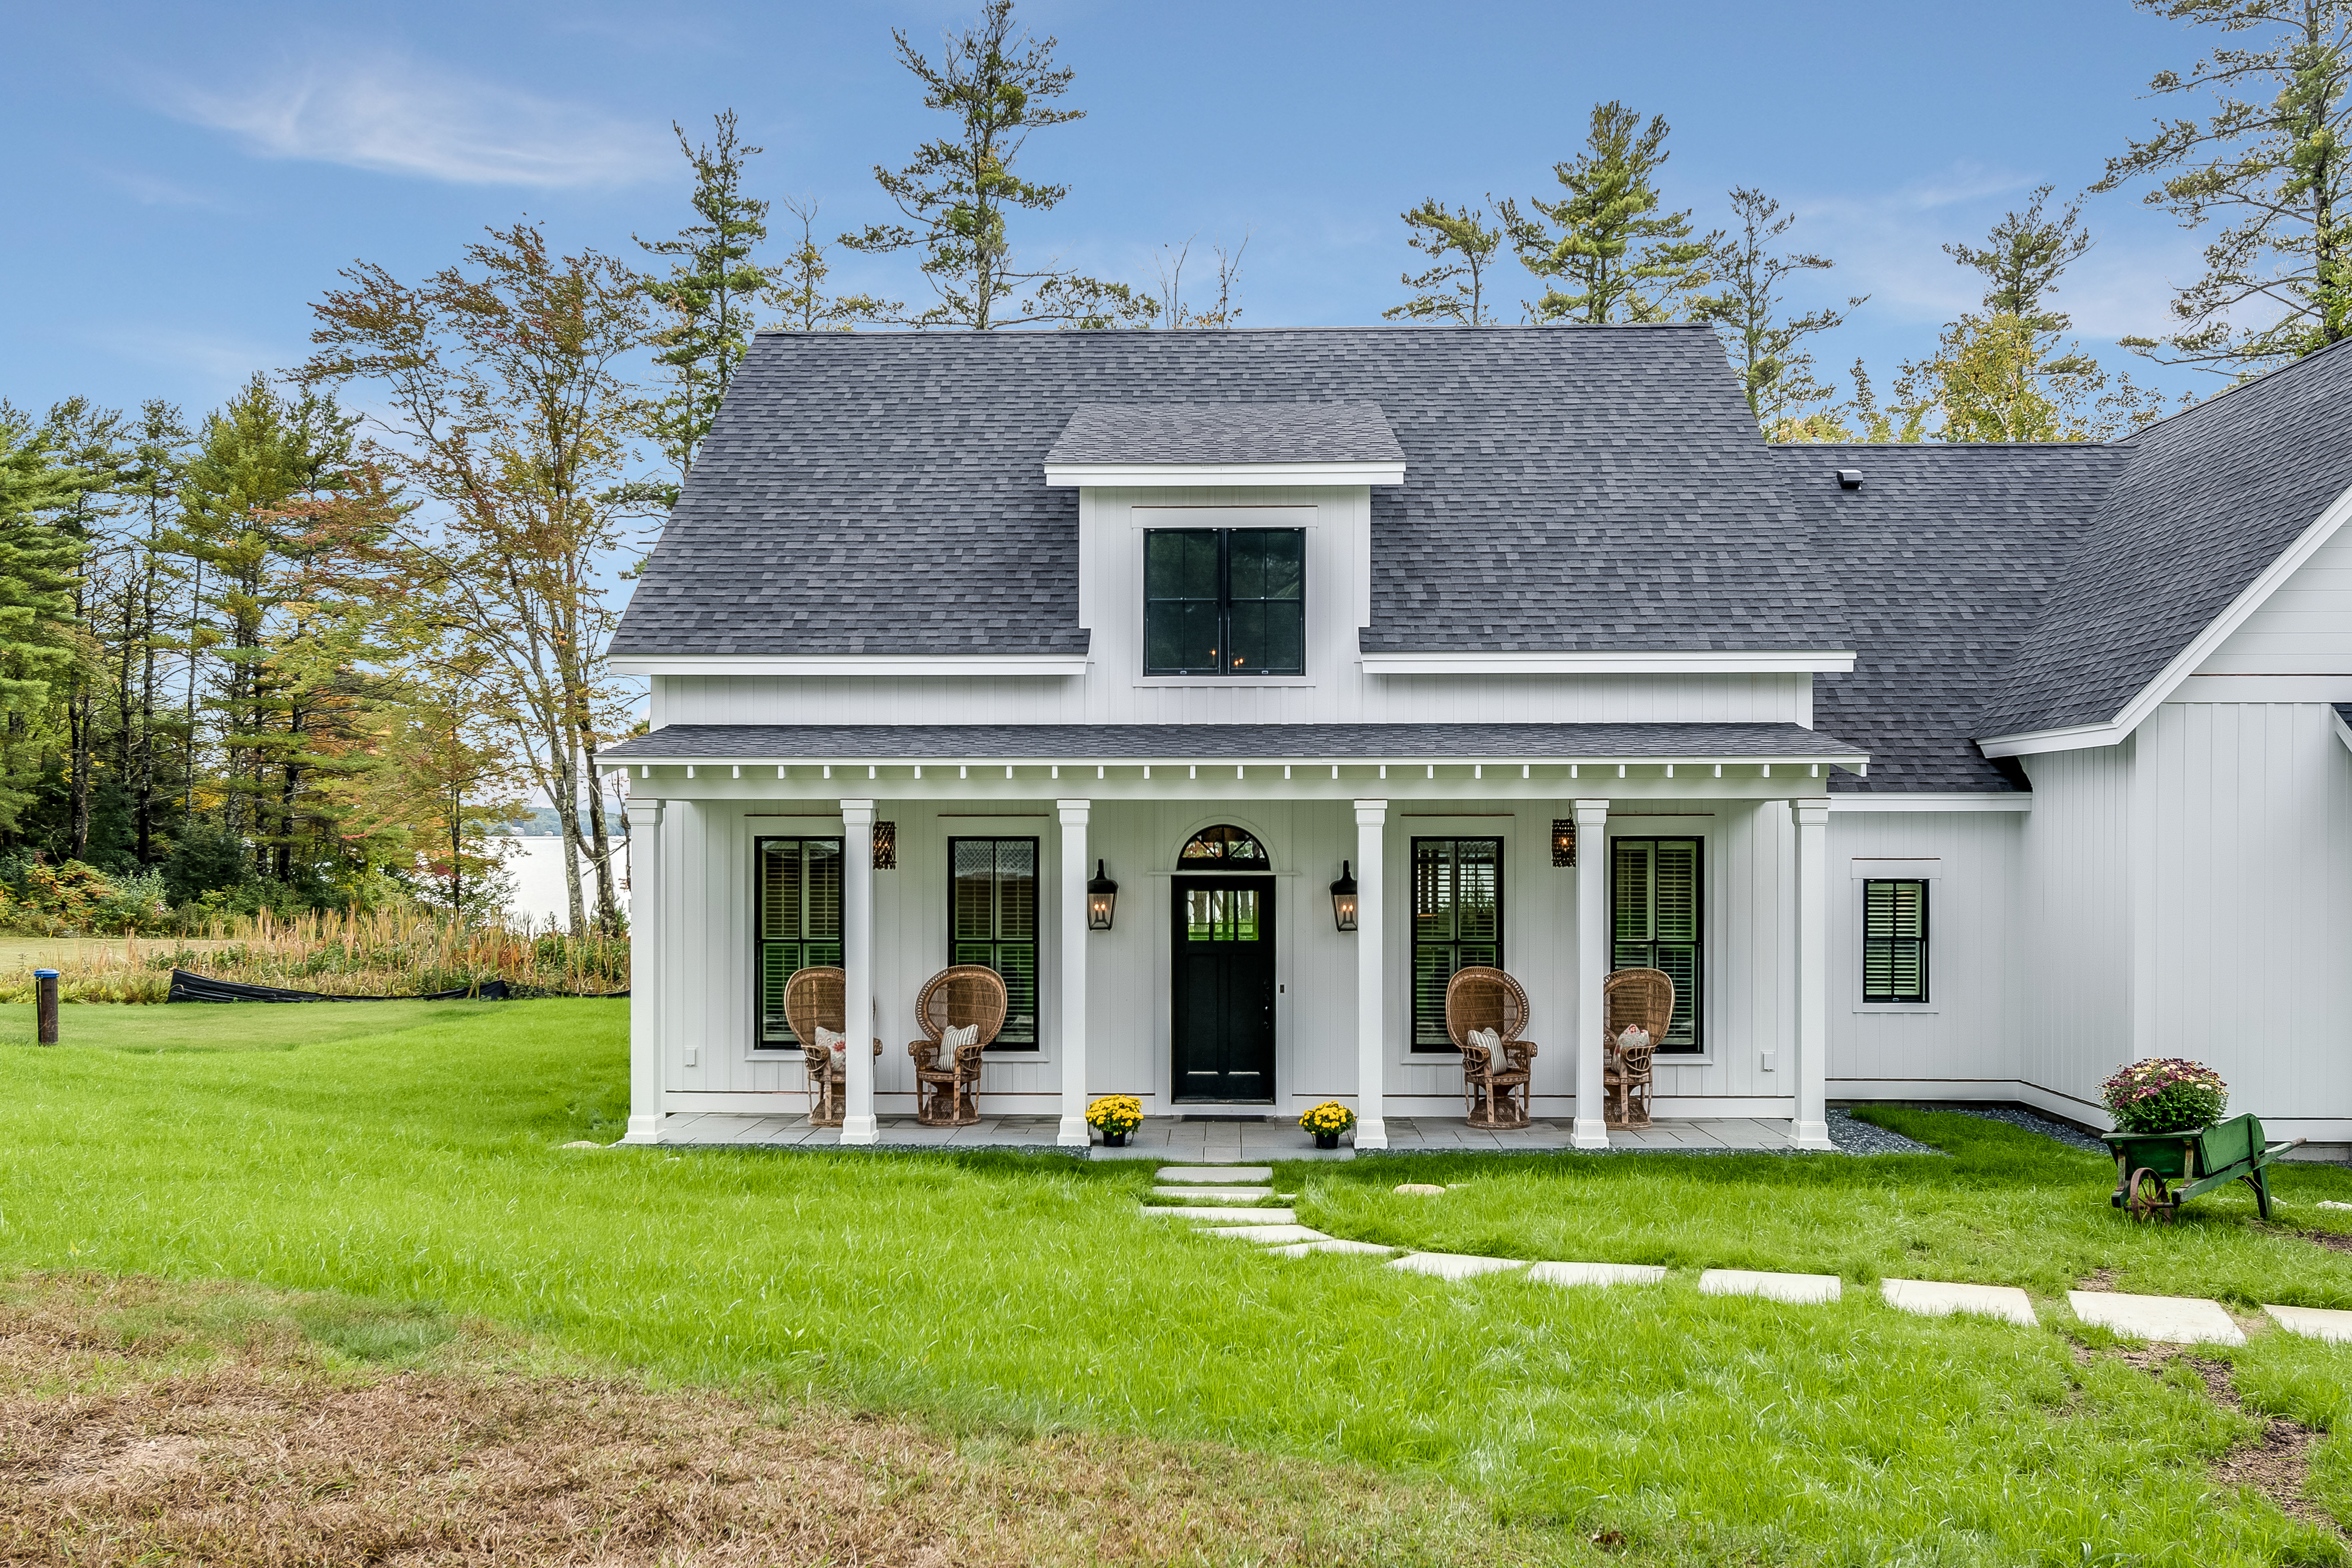 A small white house with a black roof, front porch with chairs, and a manicured lawn